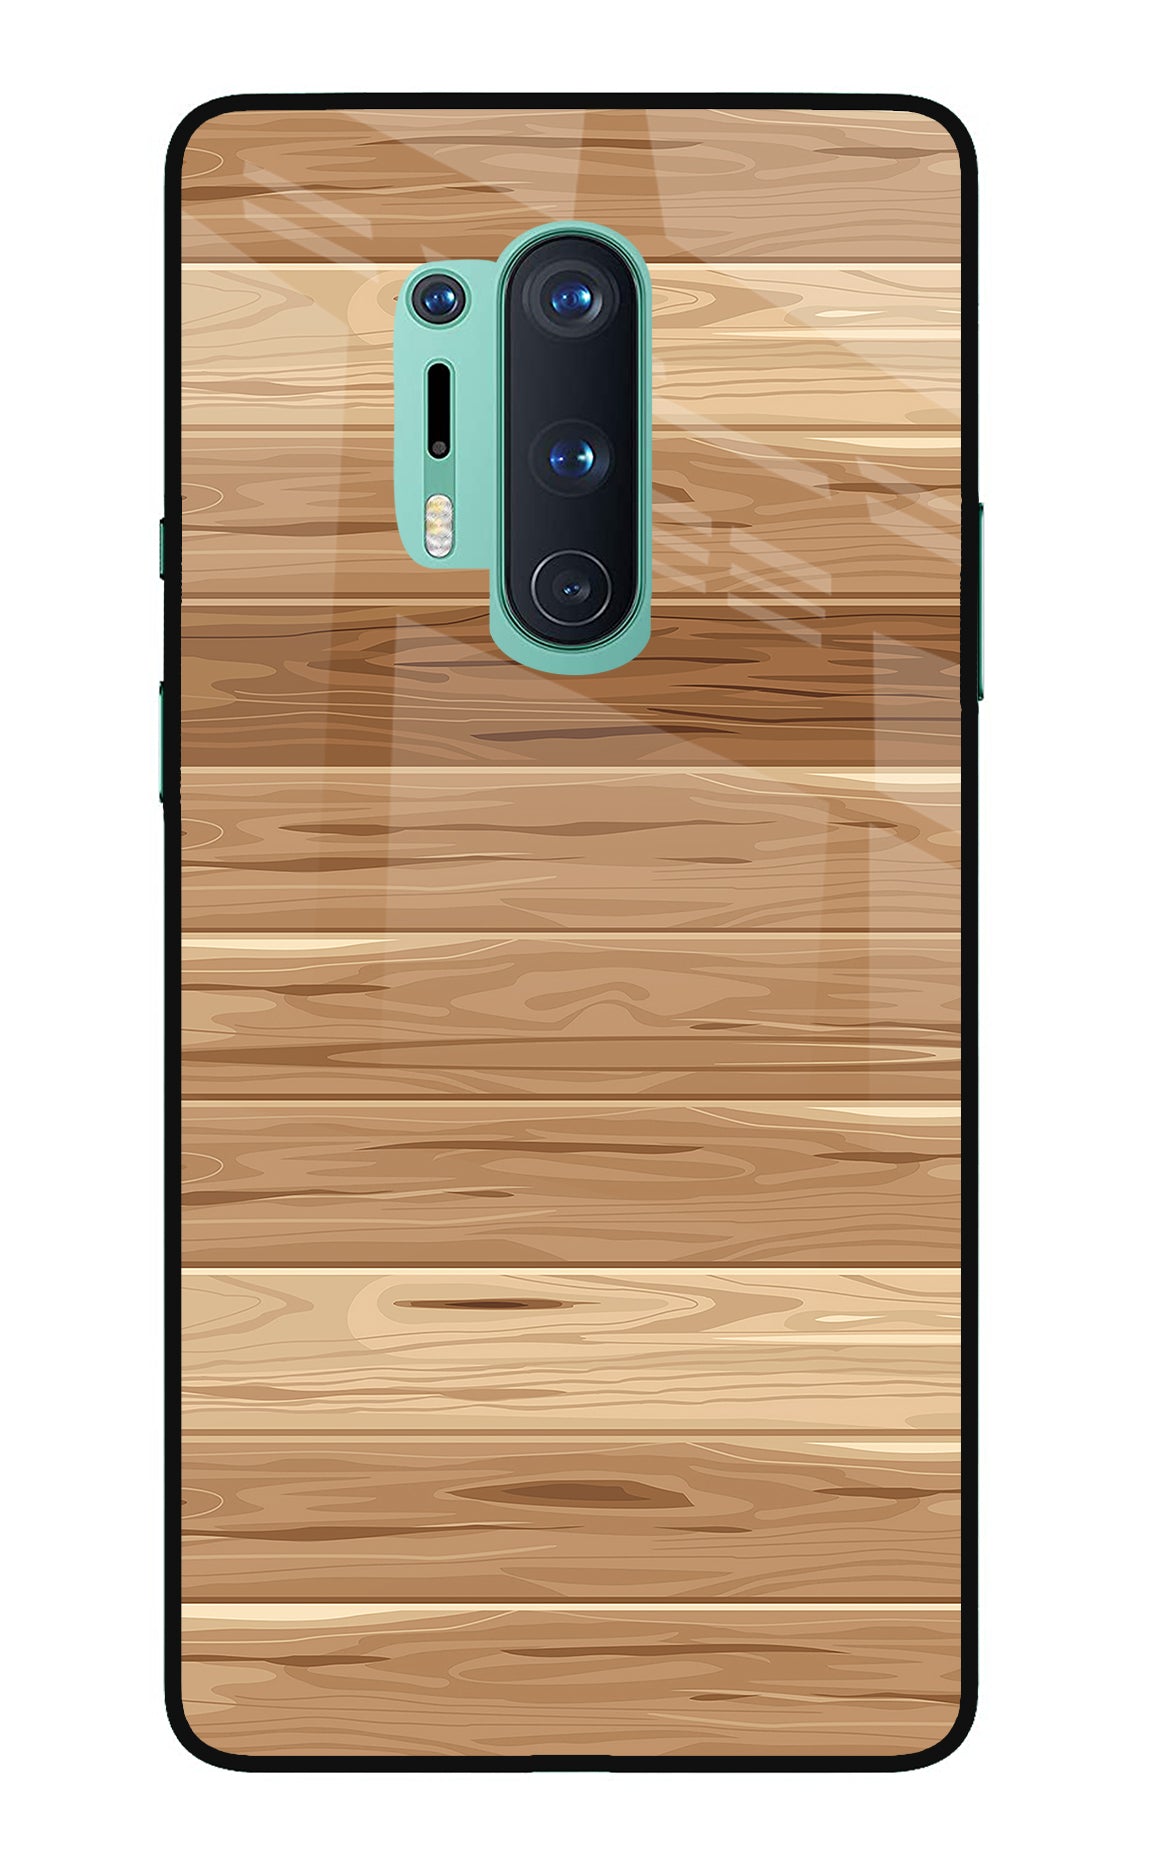 Wooden Vector Oneplus 8 Pro Back Cover